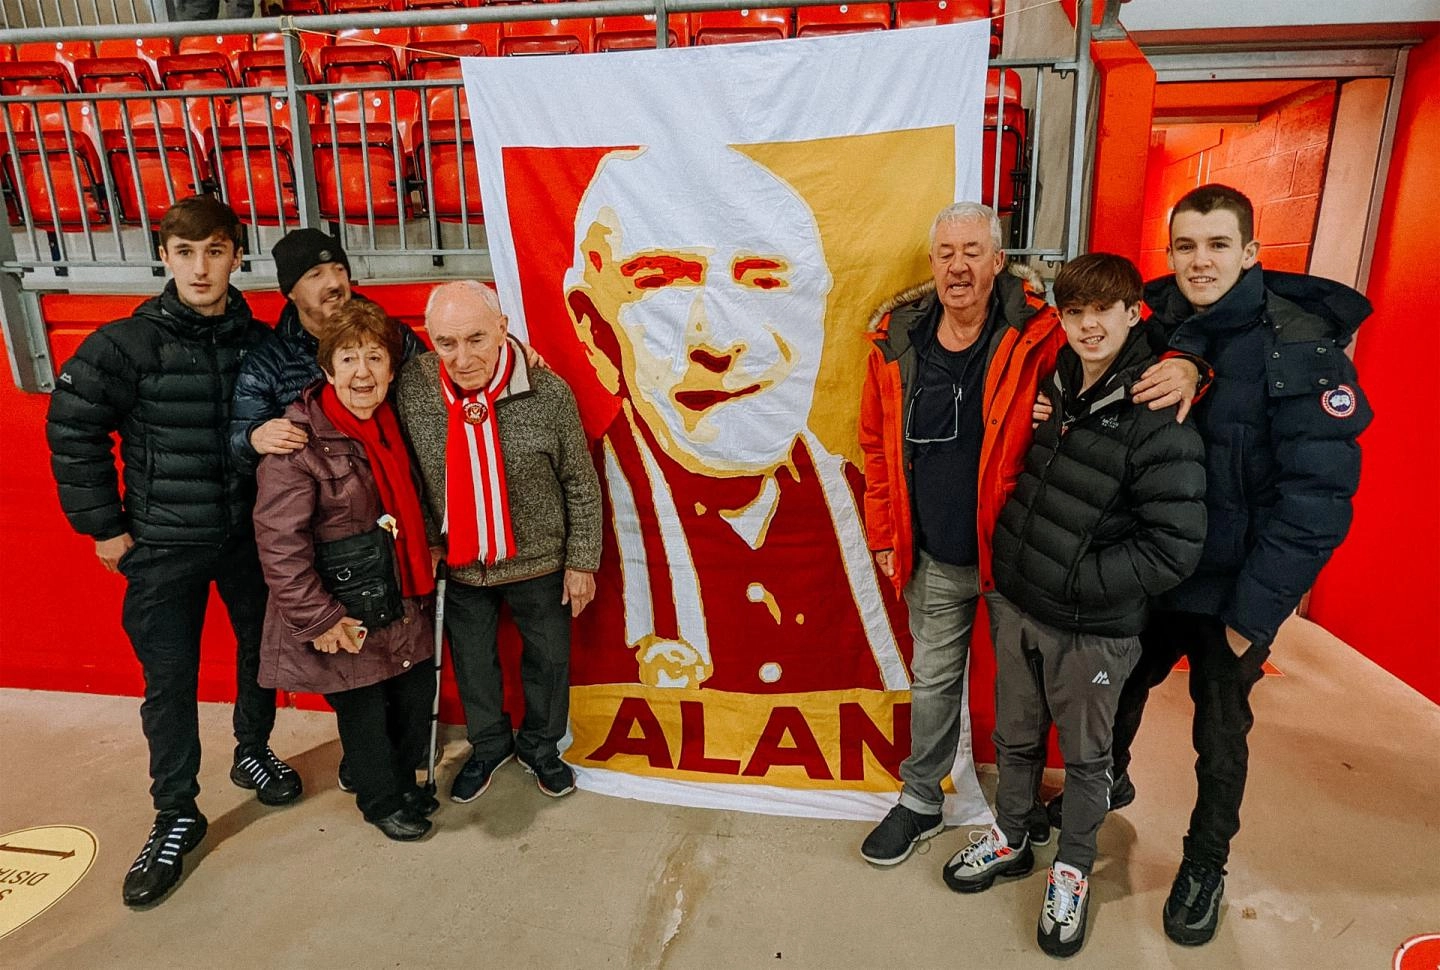 The Edwards family with Alan's banner